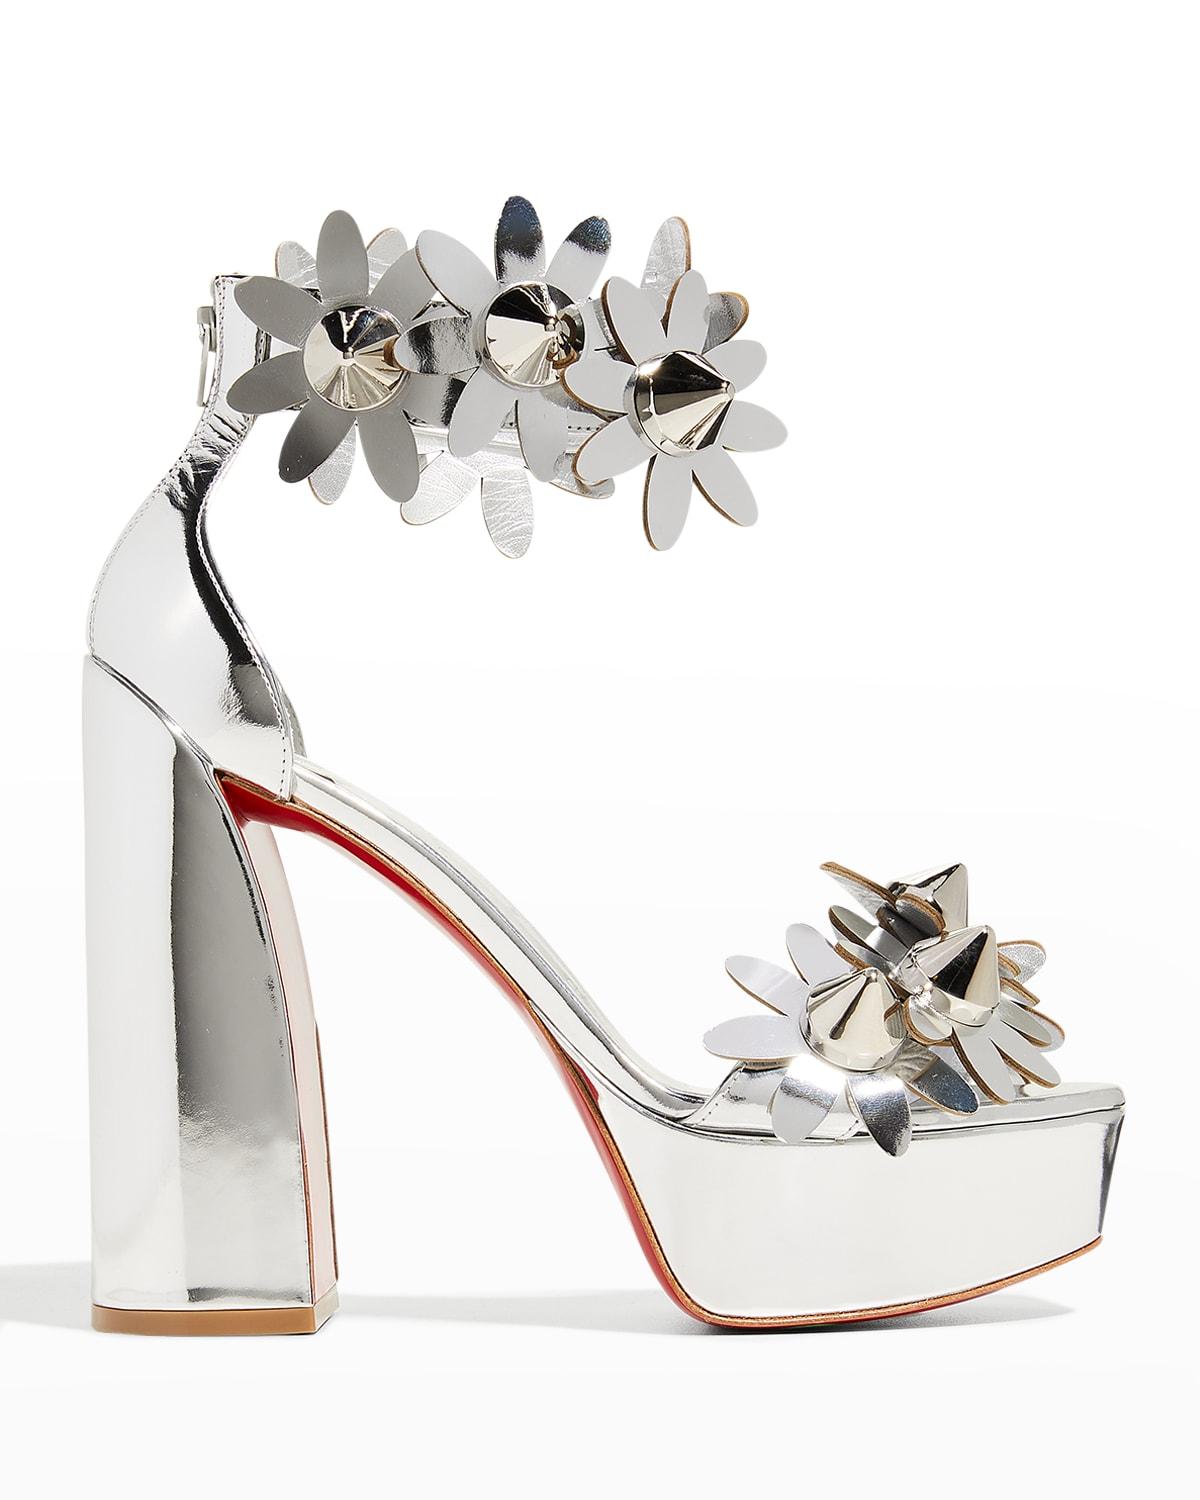 Christian Louboutin Daisy Spike Metallic Ankle-cuff Red Sole Sandals in  White | Lyst